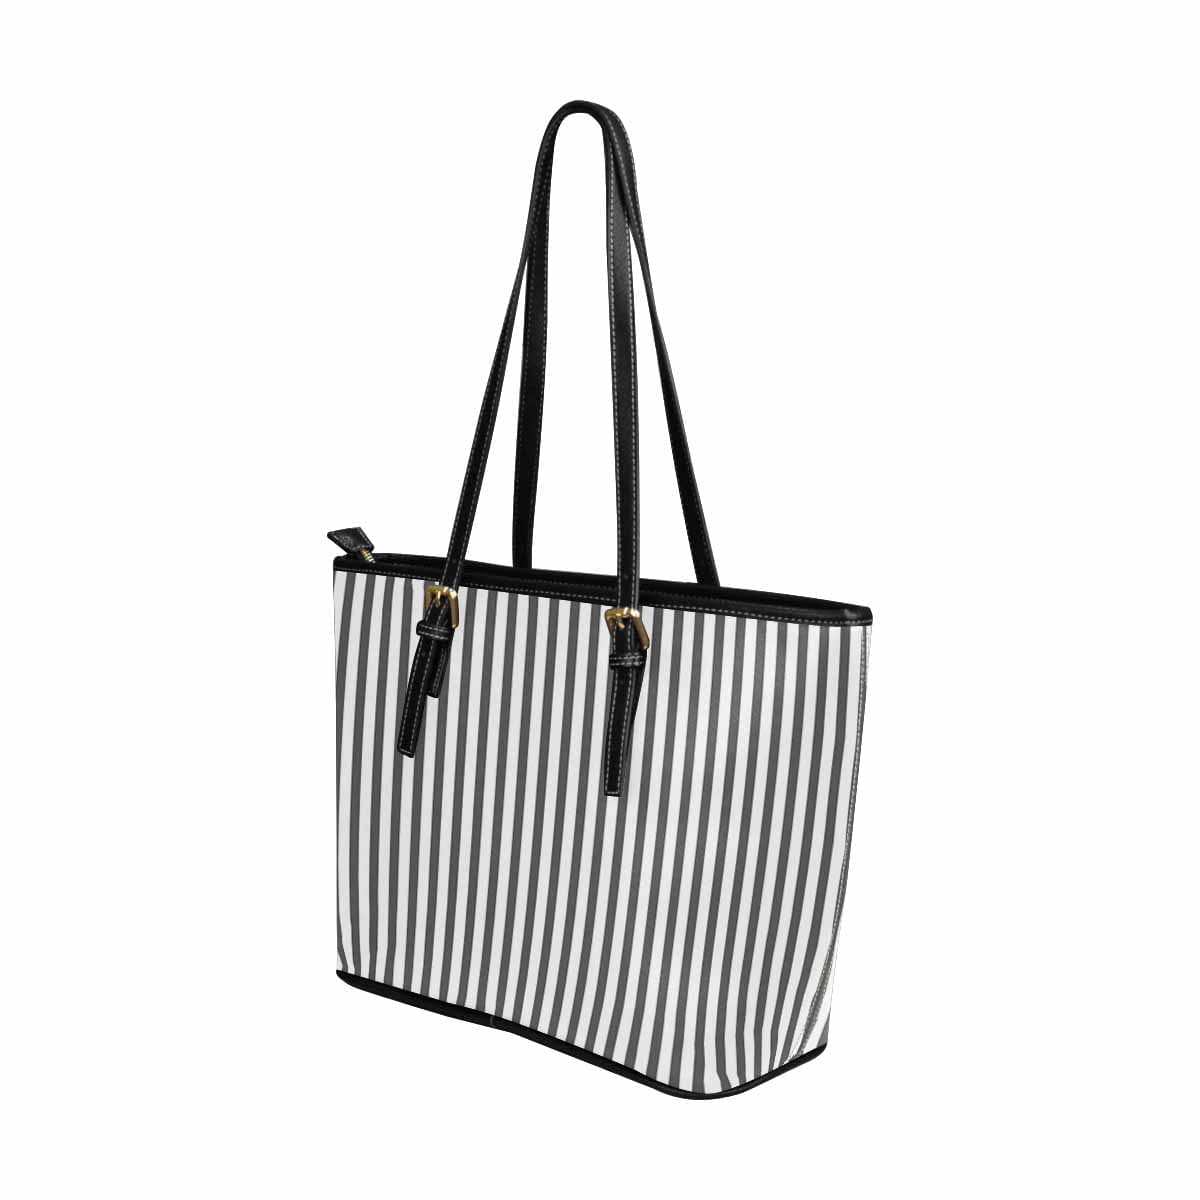 Large Leather Tote Shoulder Bag - Stripe Grey Tote - Bags | Leather Tote Bags